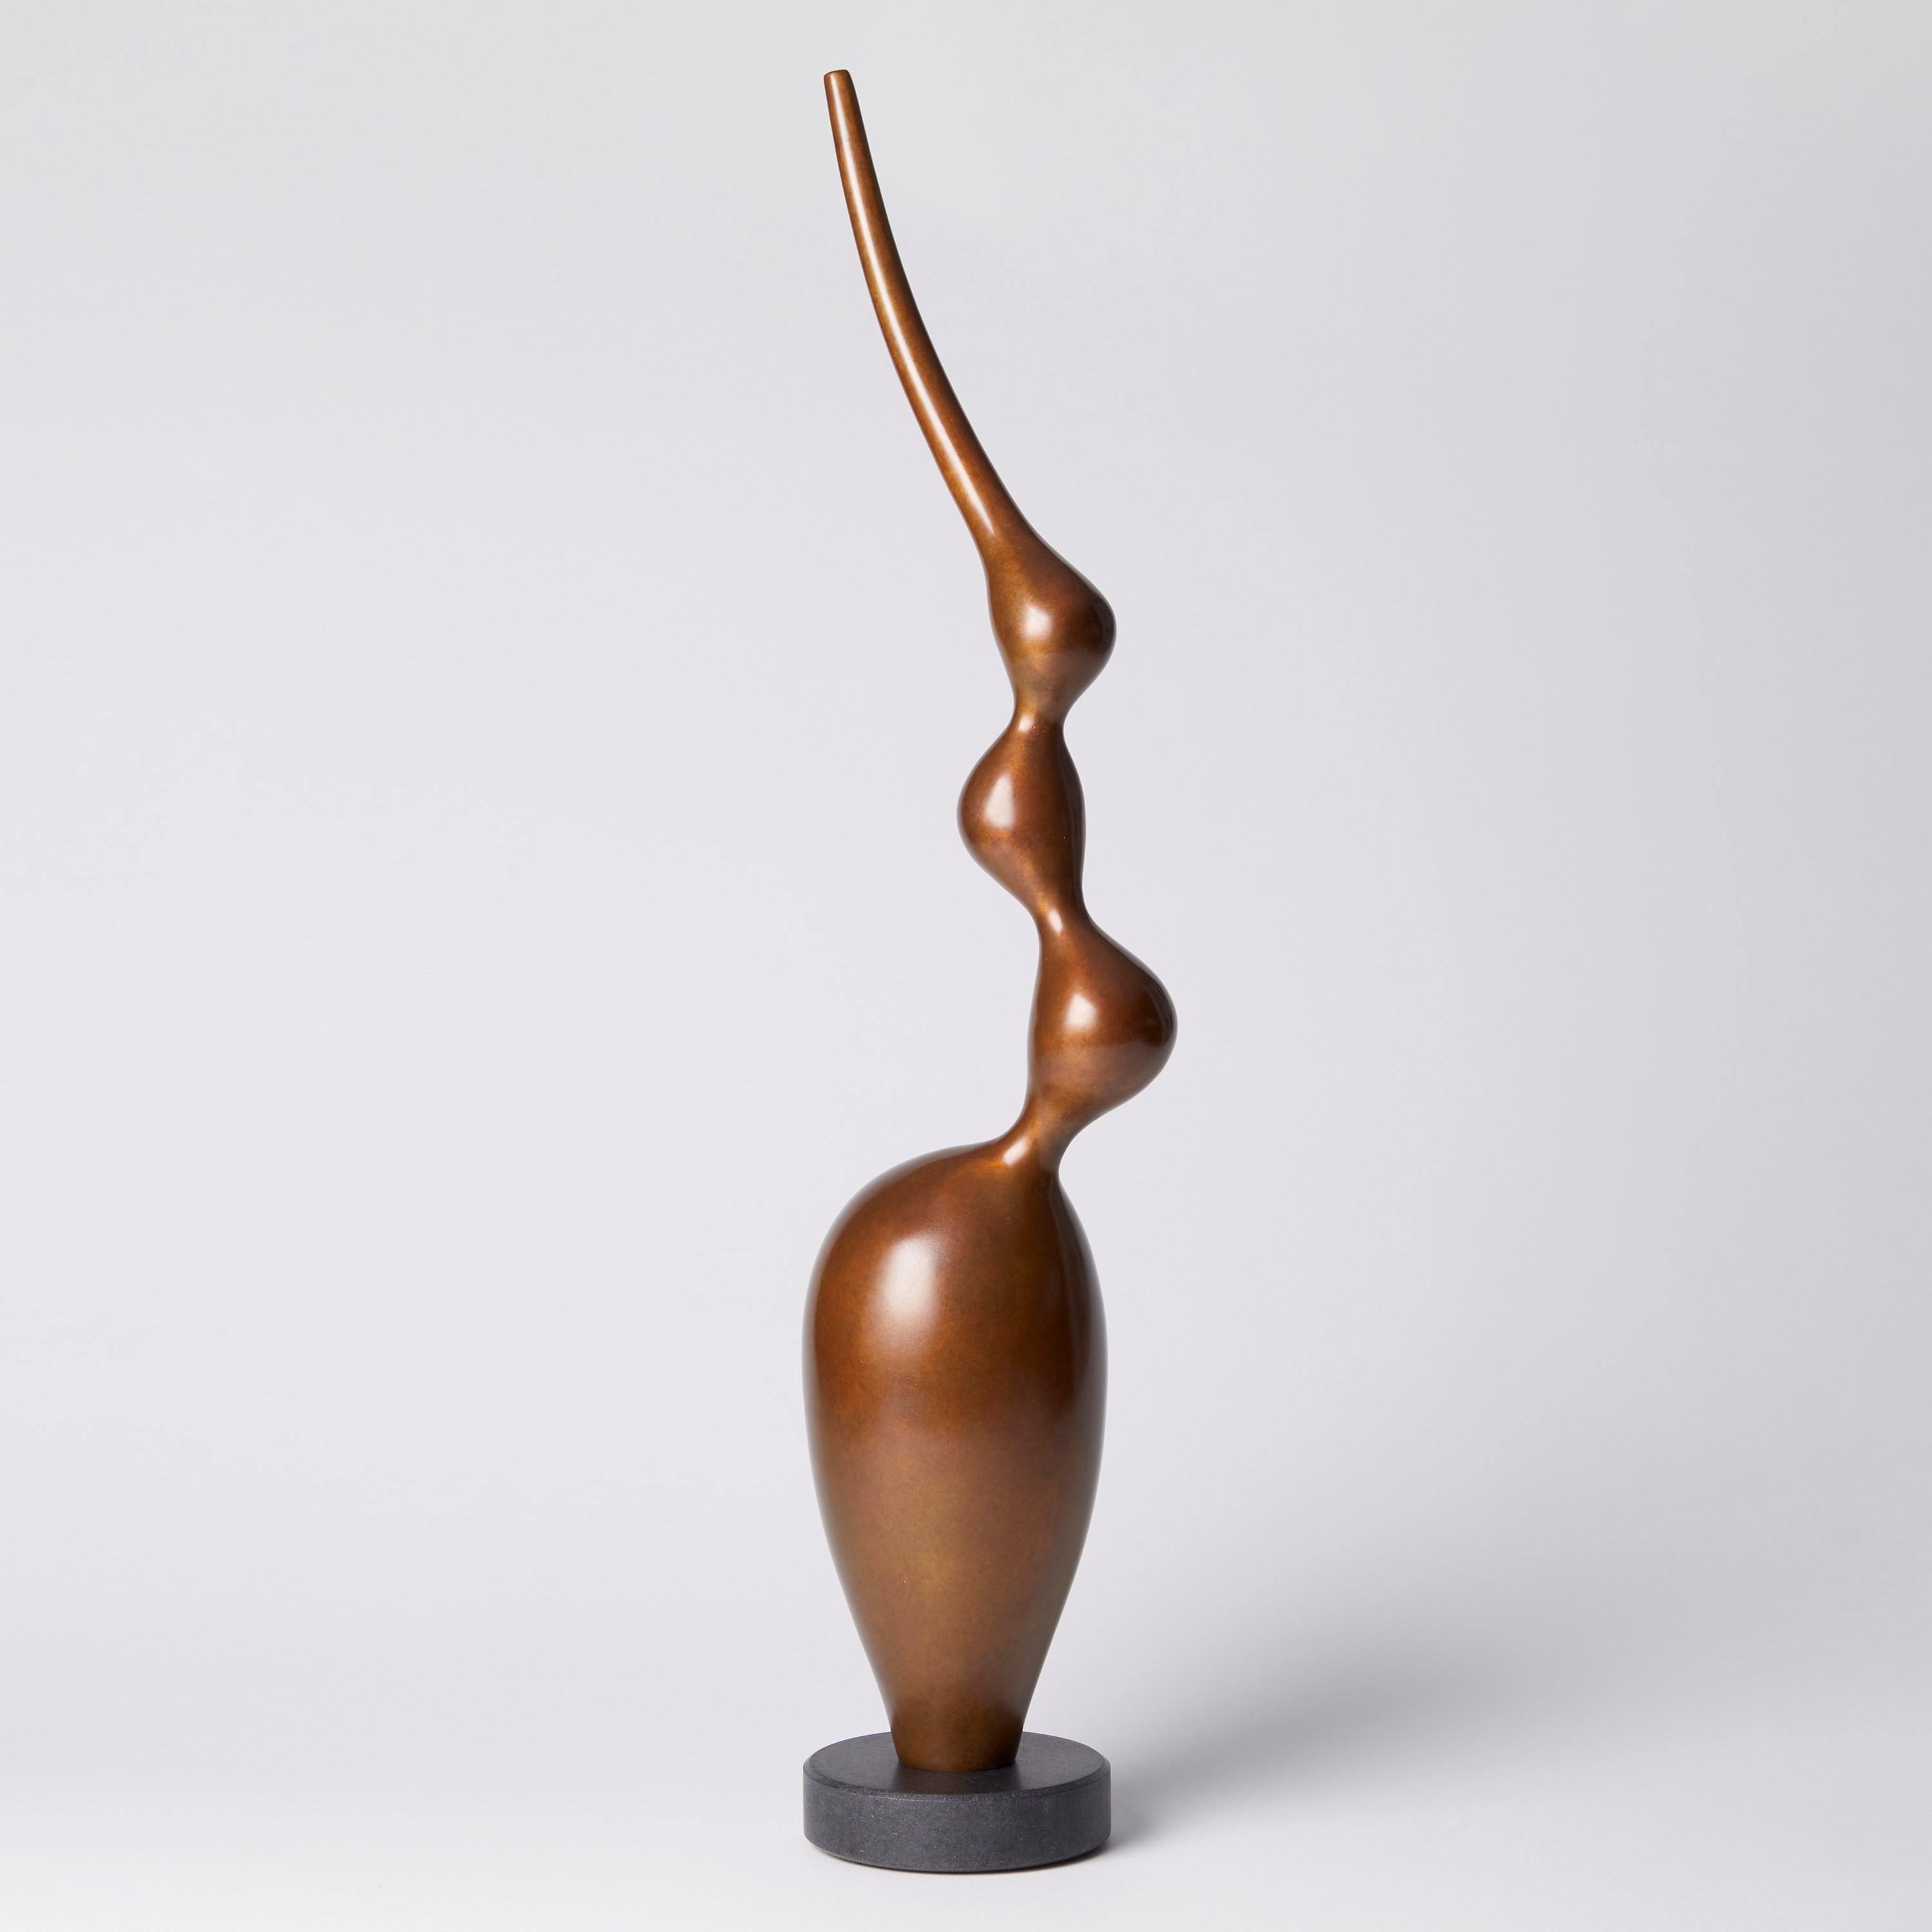 'Triple Balance II' is a limited-edition (6 + 2AP) bronze sculpture on a granite base by the British artist Vivienne Foley.

Vivienne Foley’s bronze sculptures are a recent development of her best-known works in porcelain, a medium she has worked